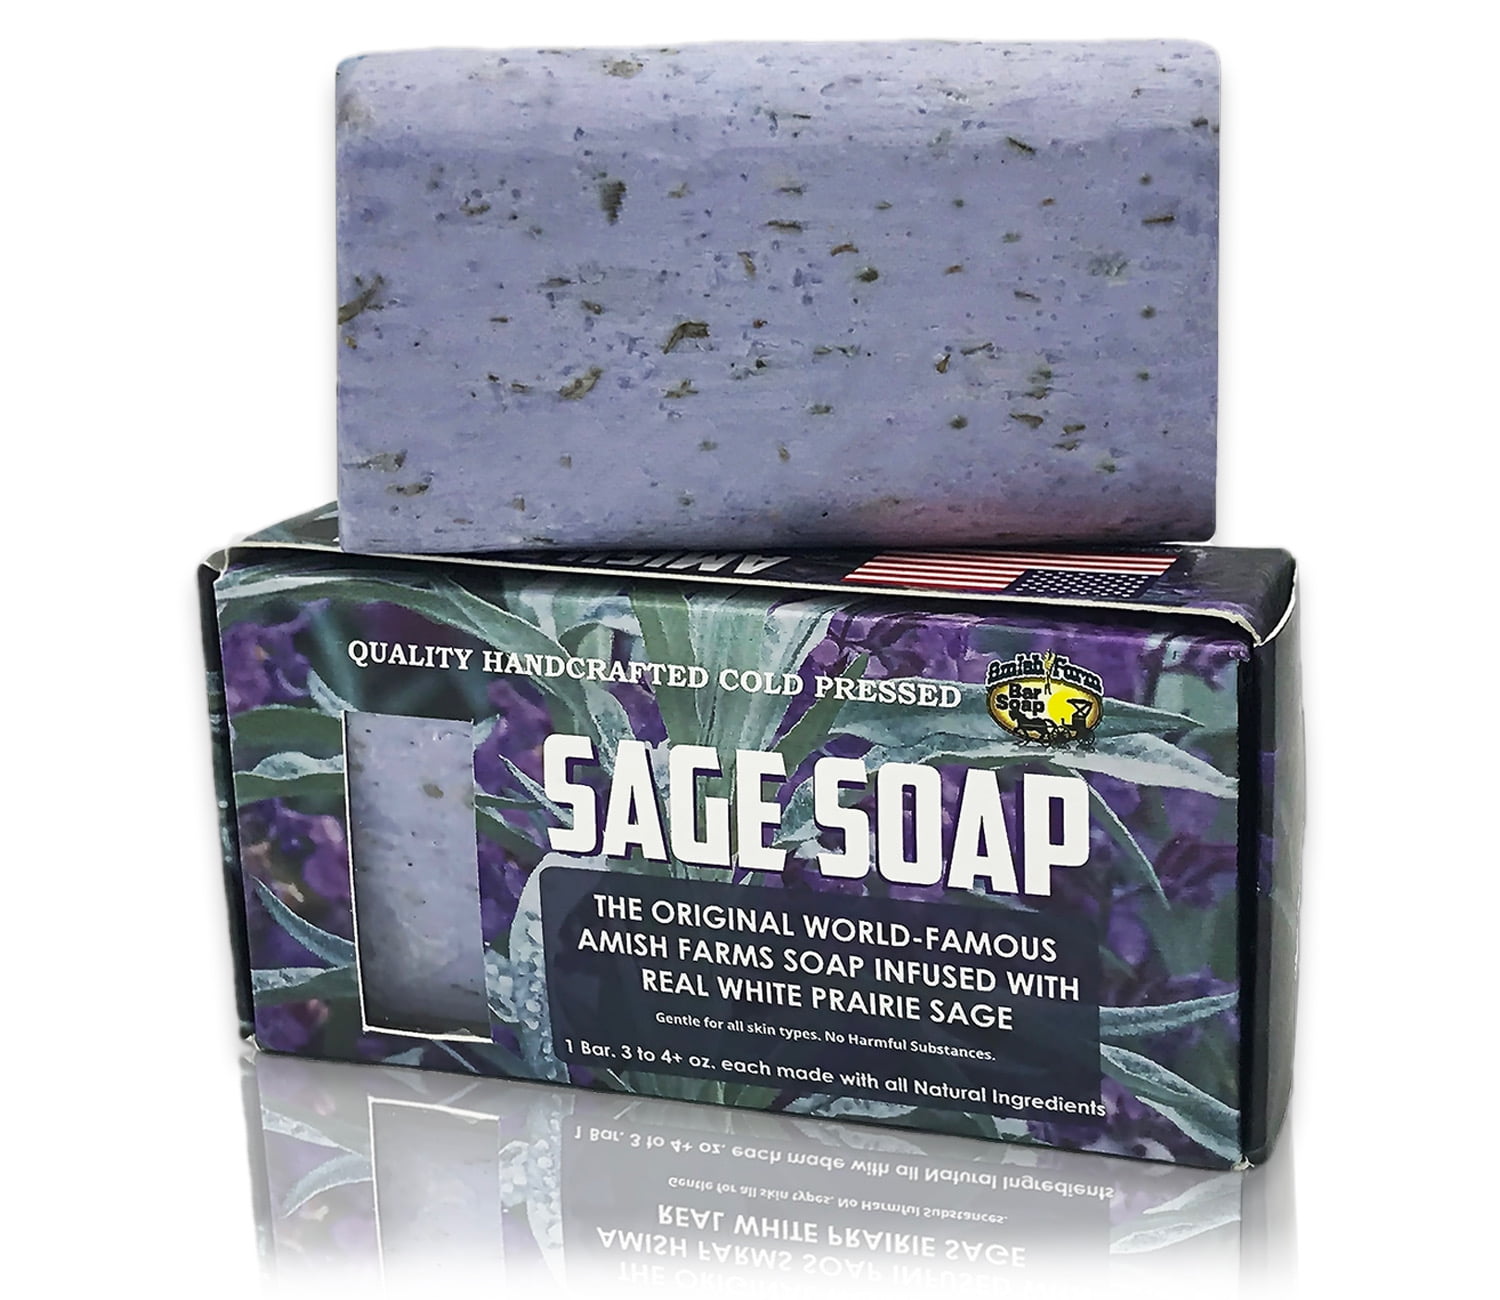 Amish Farm Soap is Best For Wash Your Face, Brenda Gantt Recipes